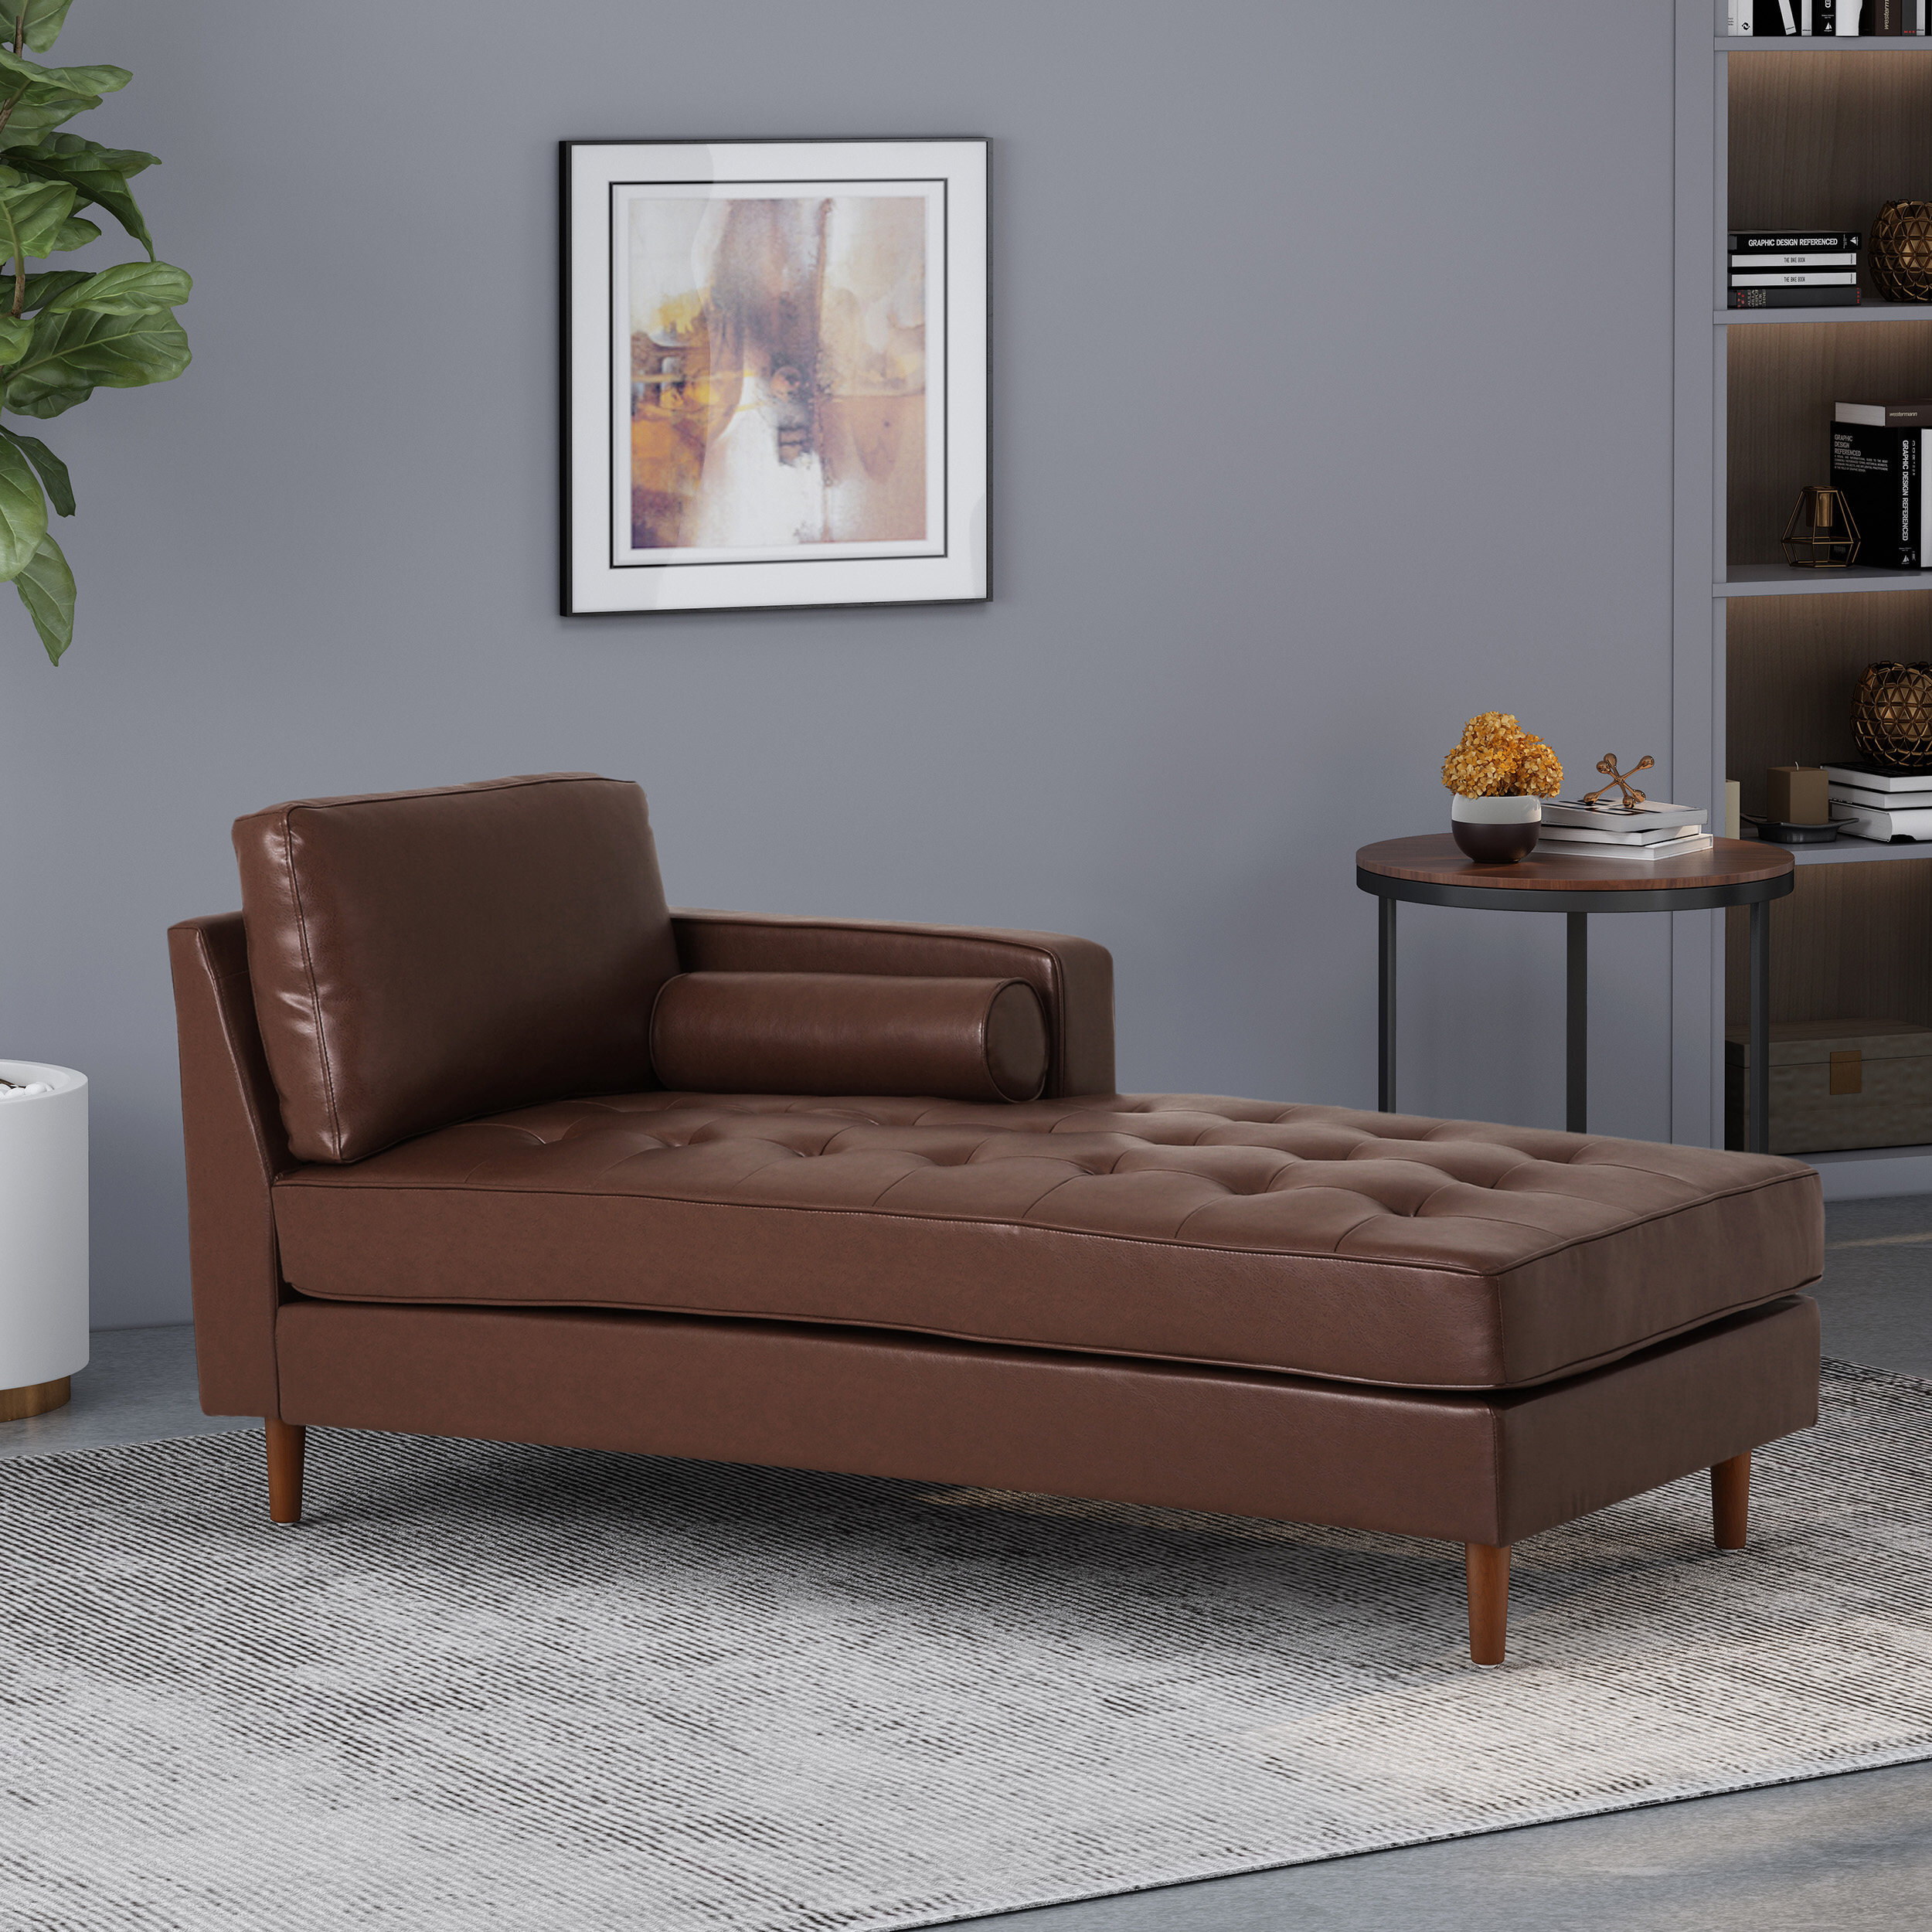 Purtell Vegan Leather Chaise Lounge